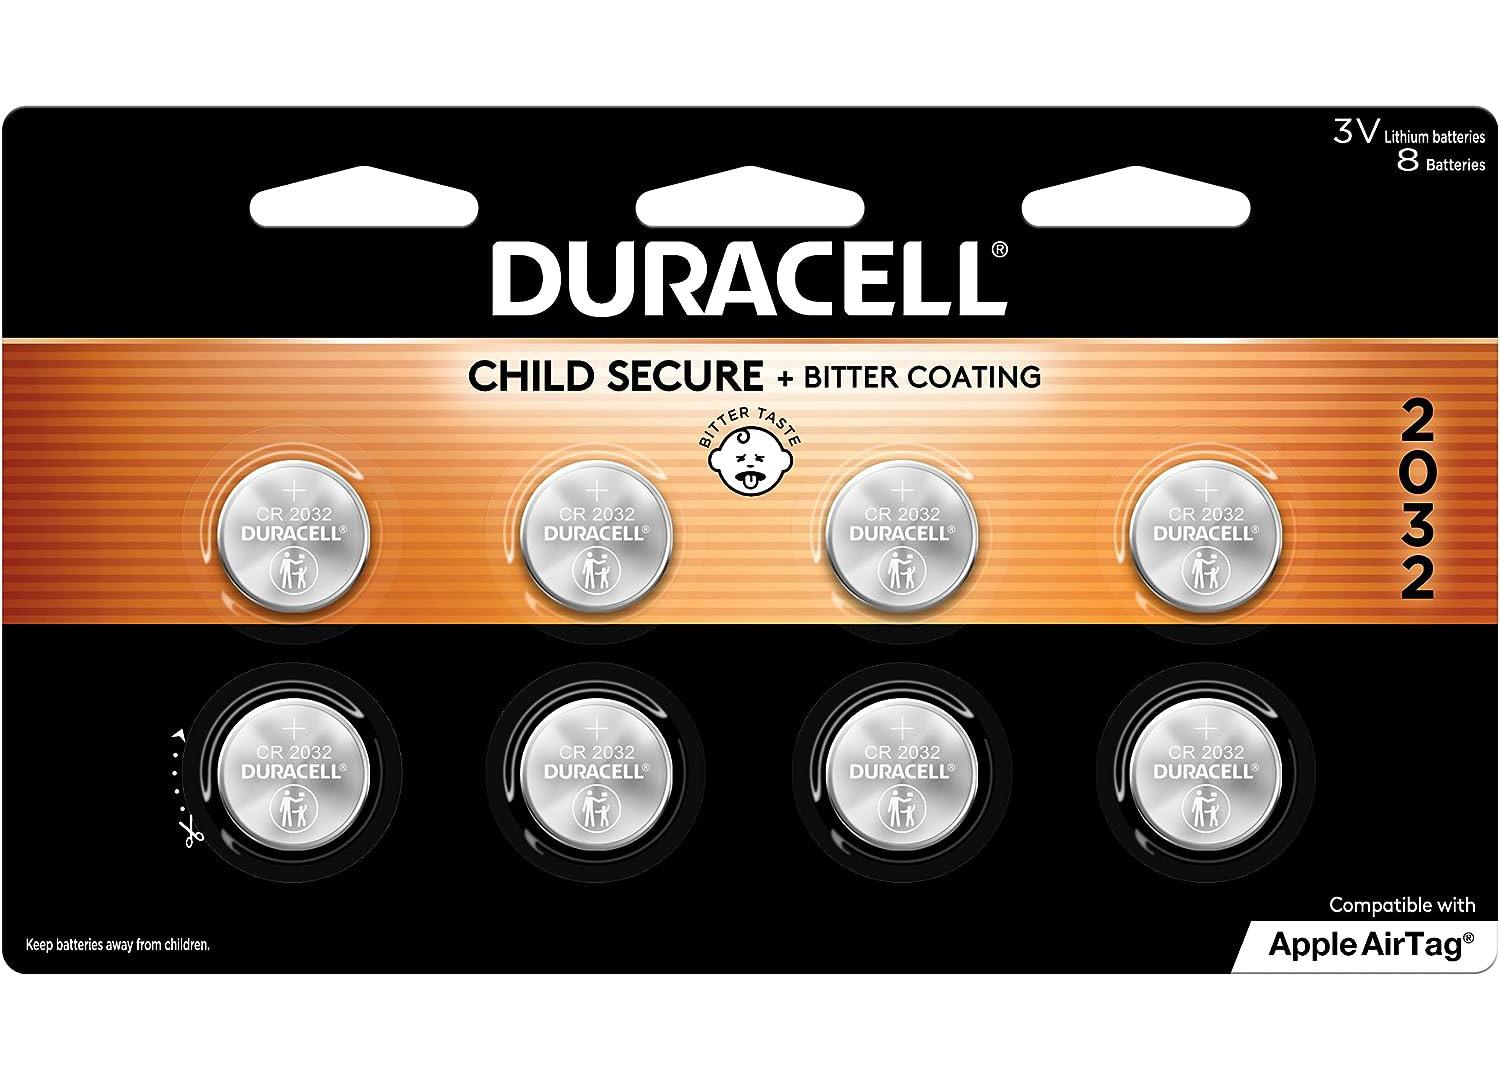 Apple Airtag Batteries Duracell CR2032 3V Lithium Batteries 8 Pack for $6.15 Shipped